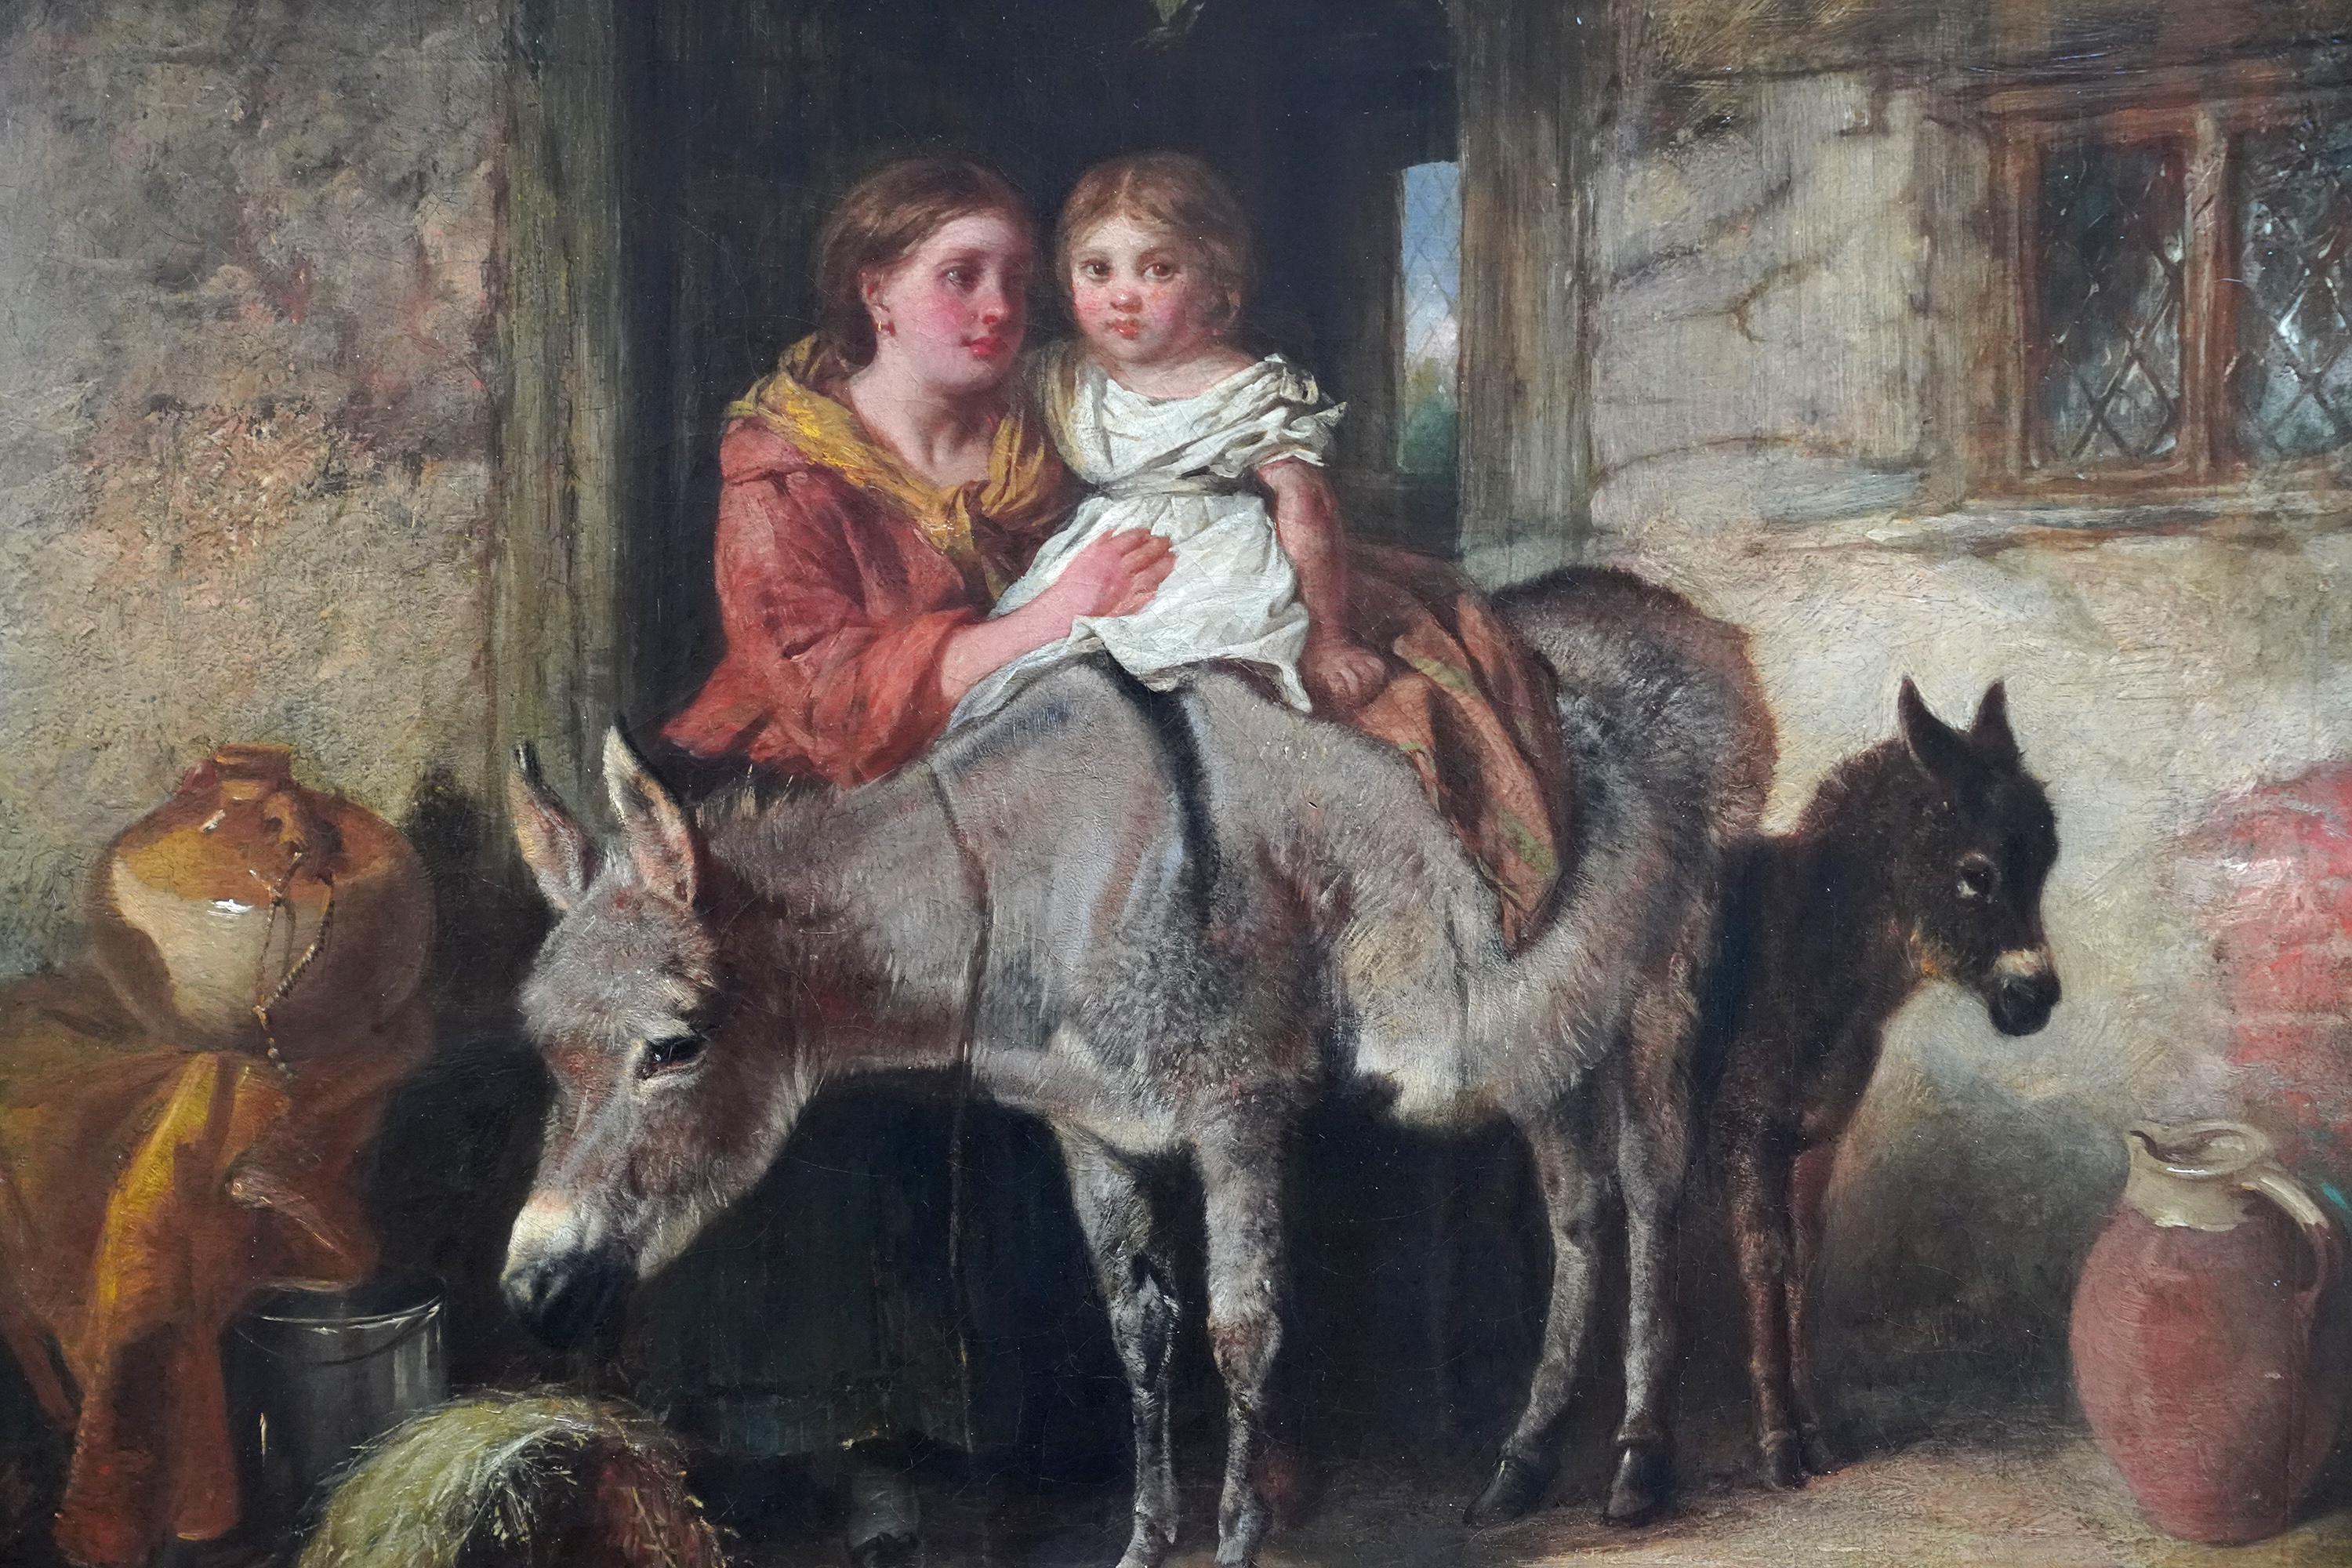 Portrait of Mother, Child and Donkey - British 19th century genre oil painting - Brown Animal Painting by Isaac Henzell